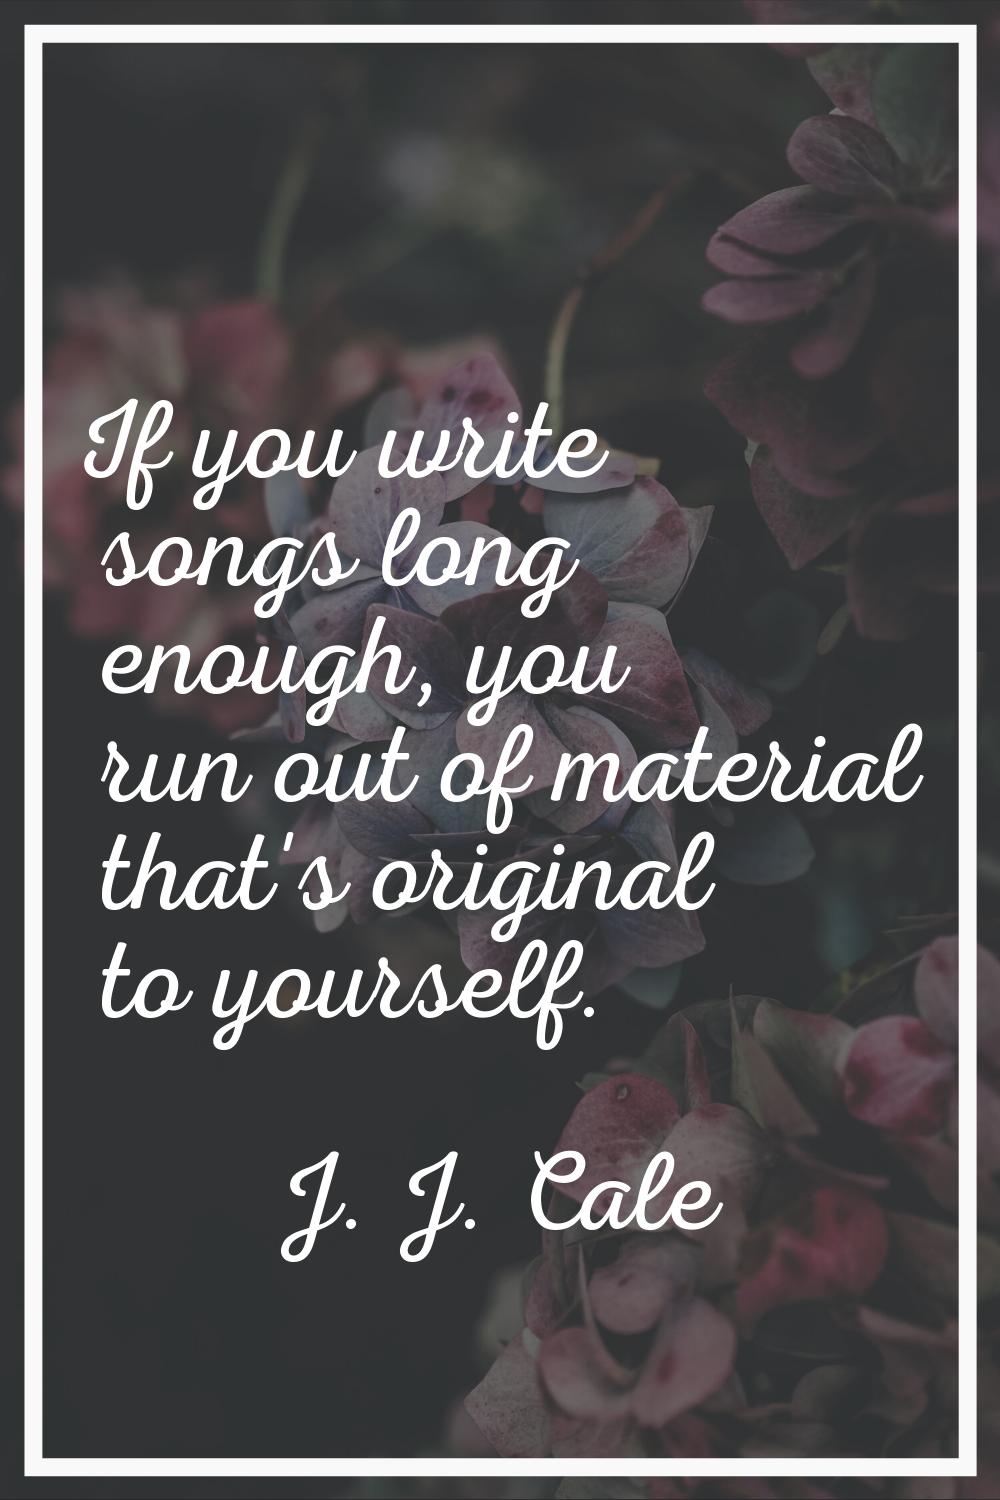 If you write songs long enough, you run out of material that's original to yourself.